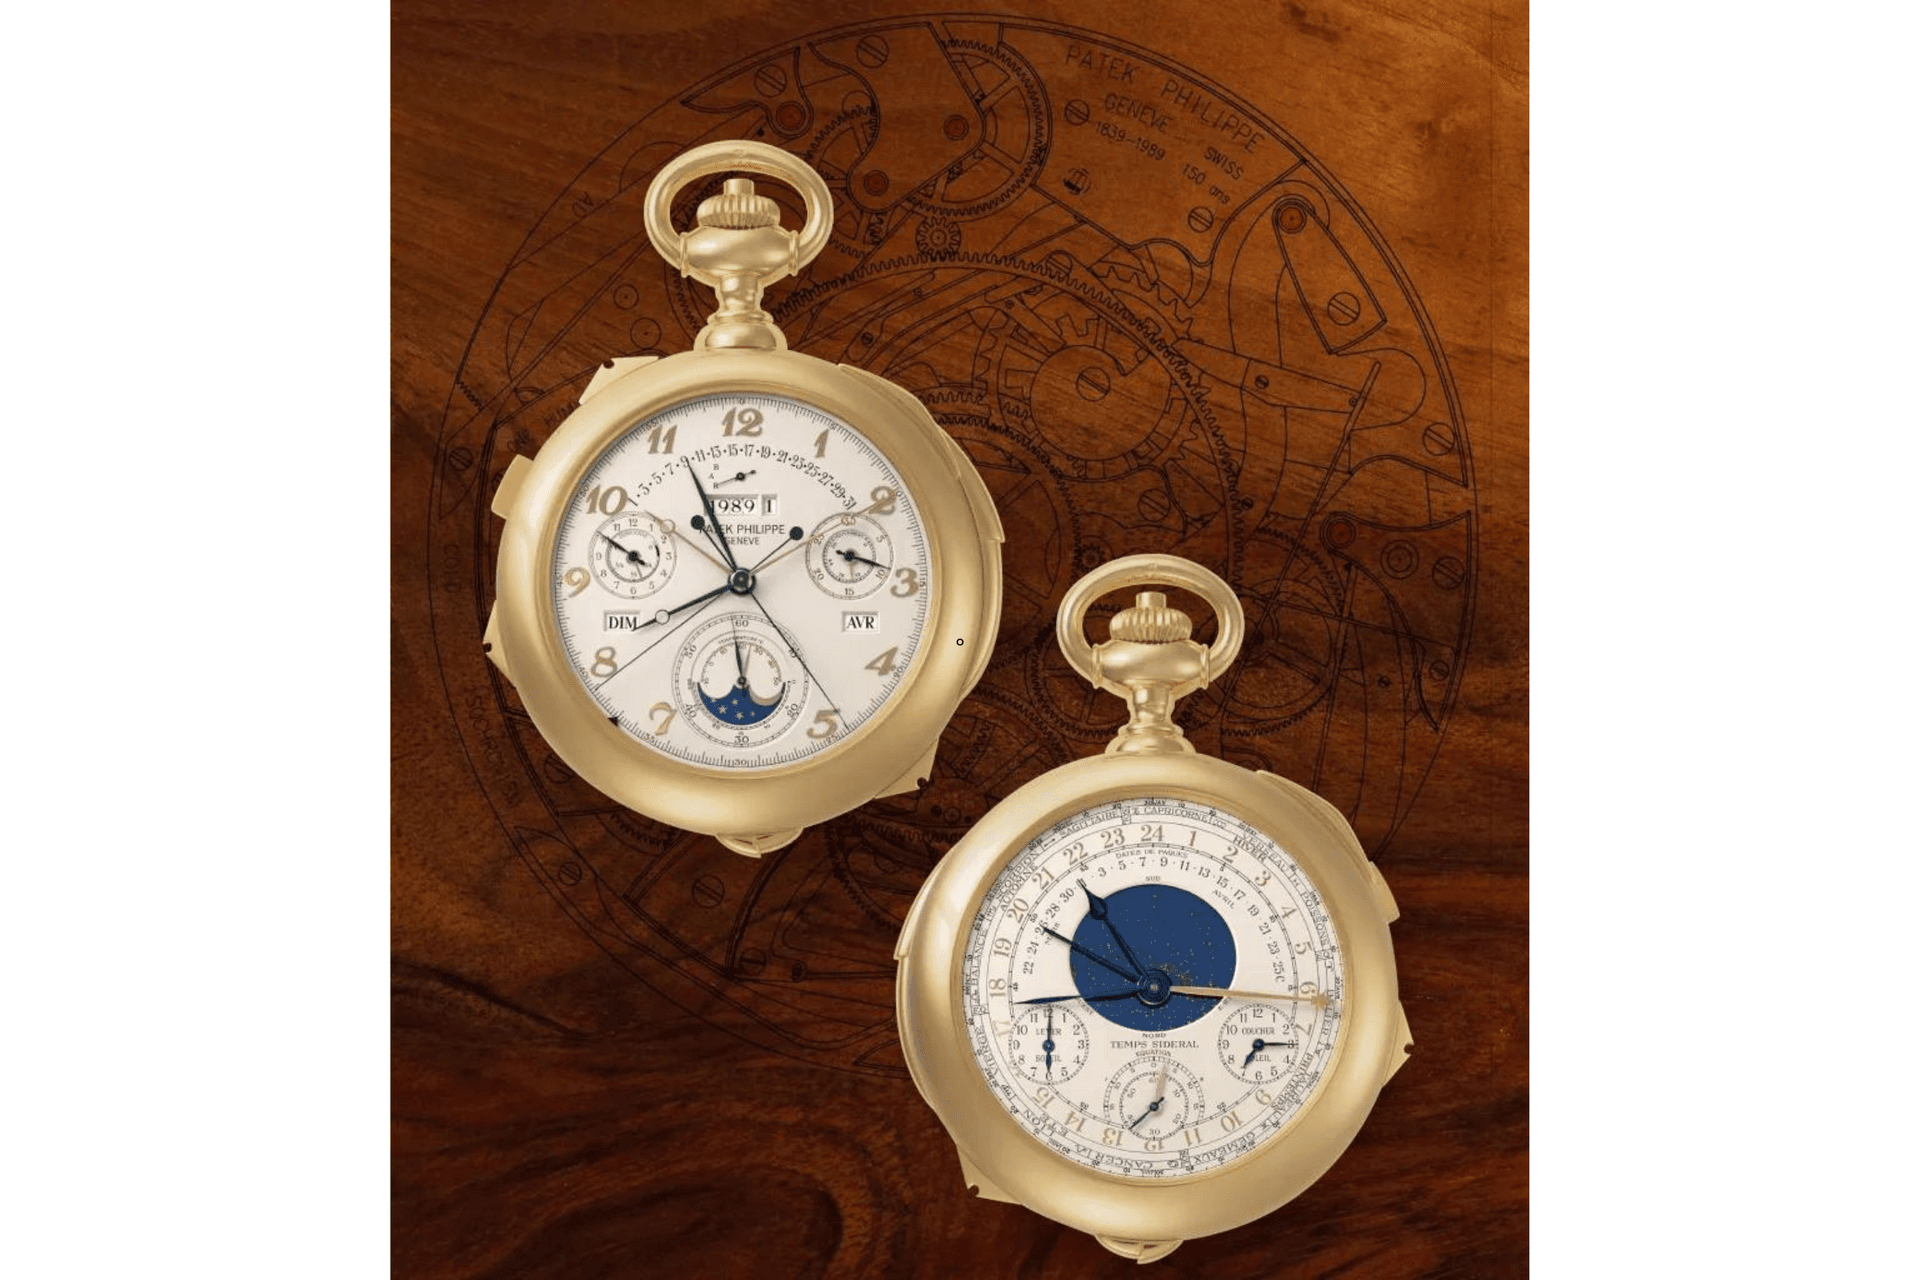 Patek Philippe’s Caliber 89 is an incredible pocket watch that weighed in at more than a kilogram but managed to pack in 33 complications, both familiar and esoteric Photo: ANTIQUORUM